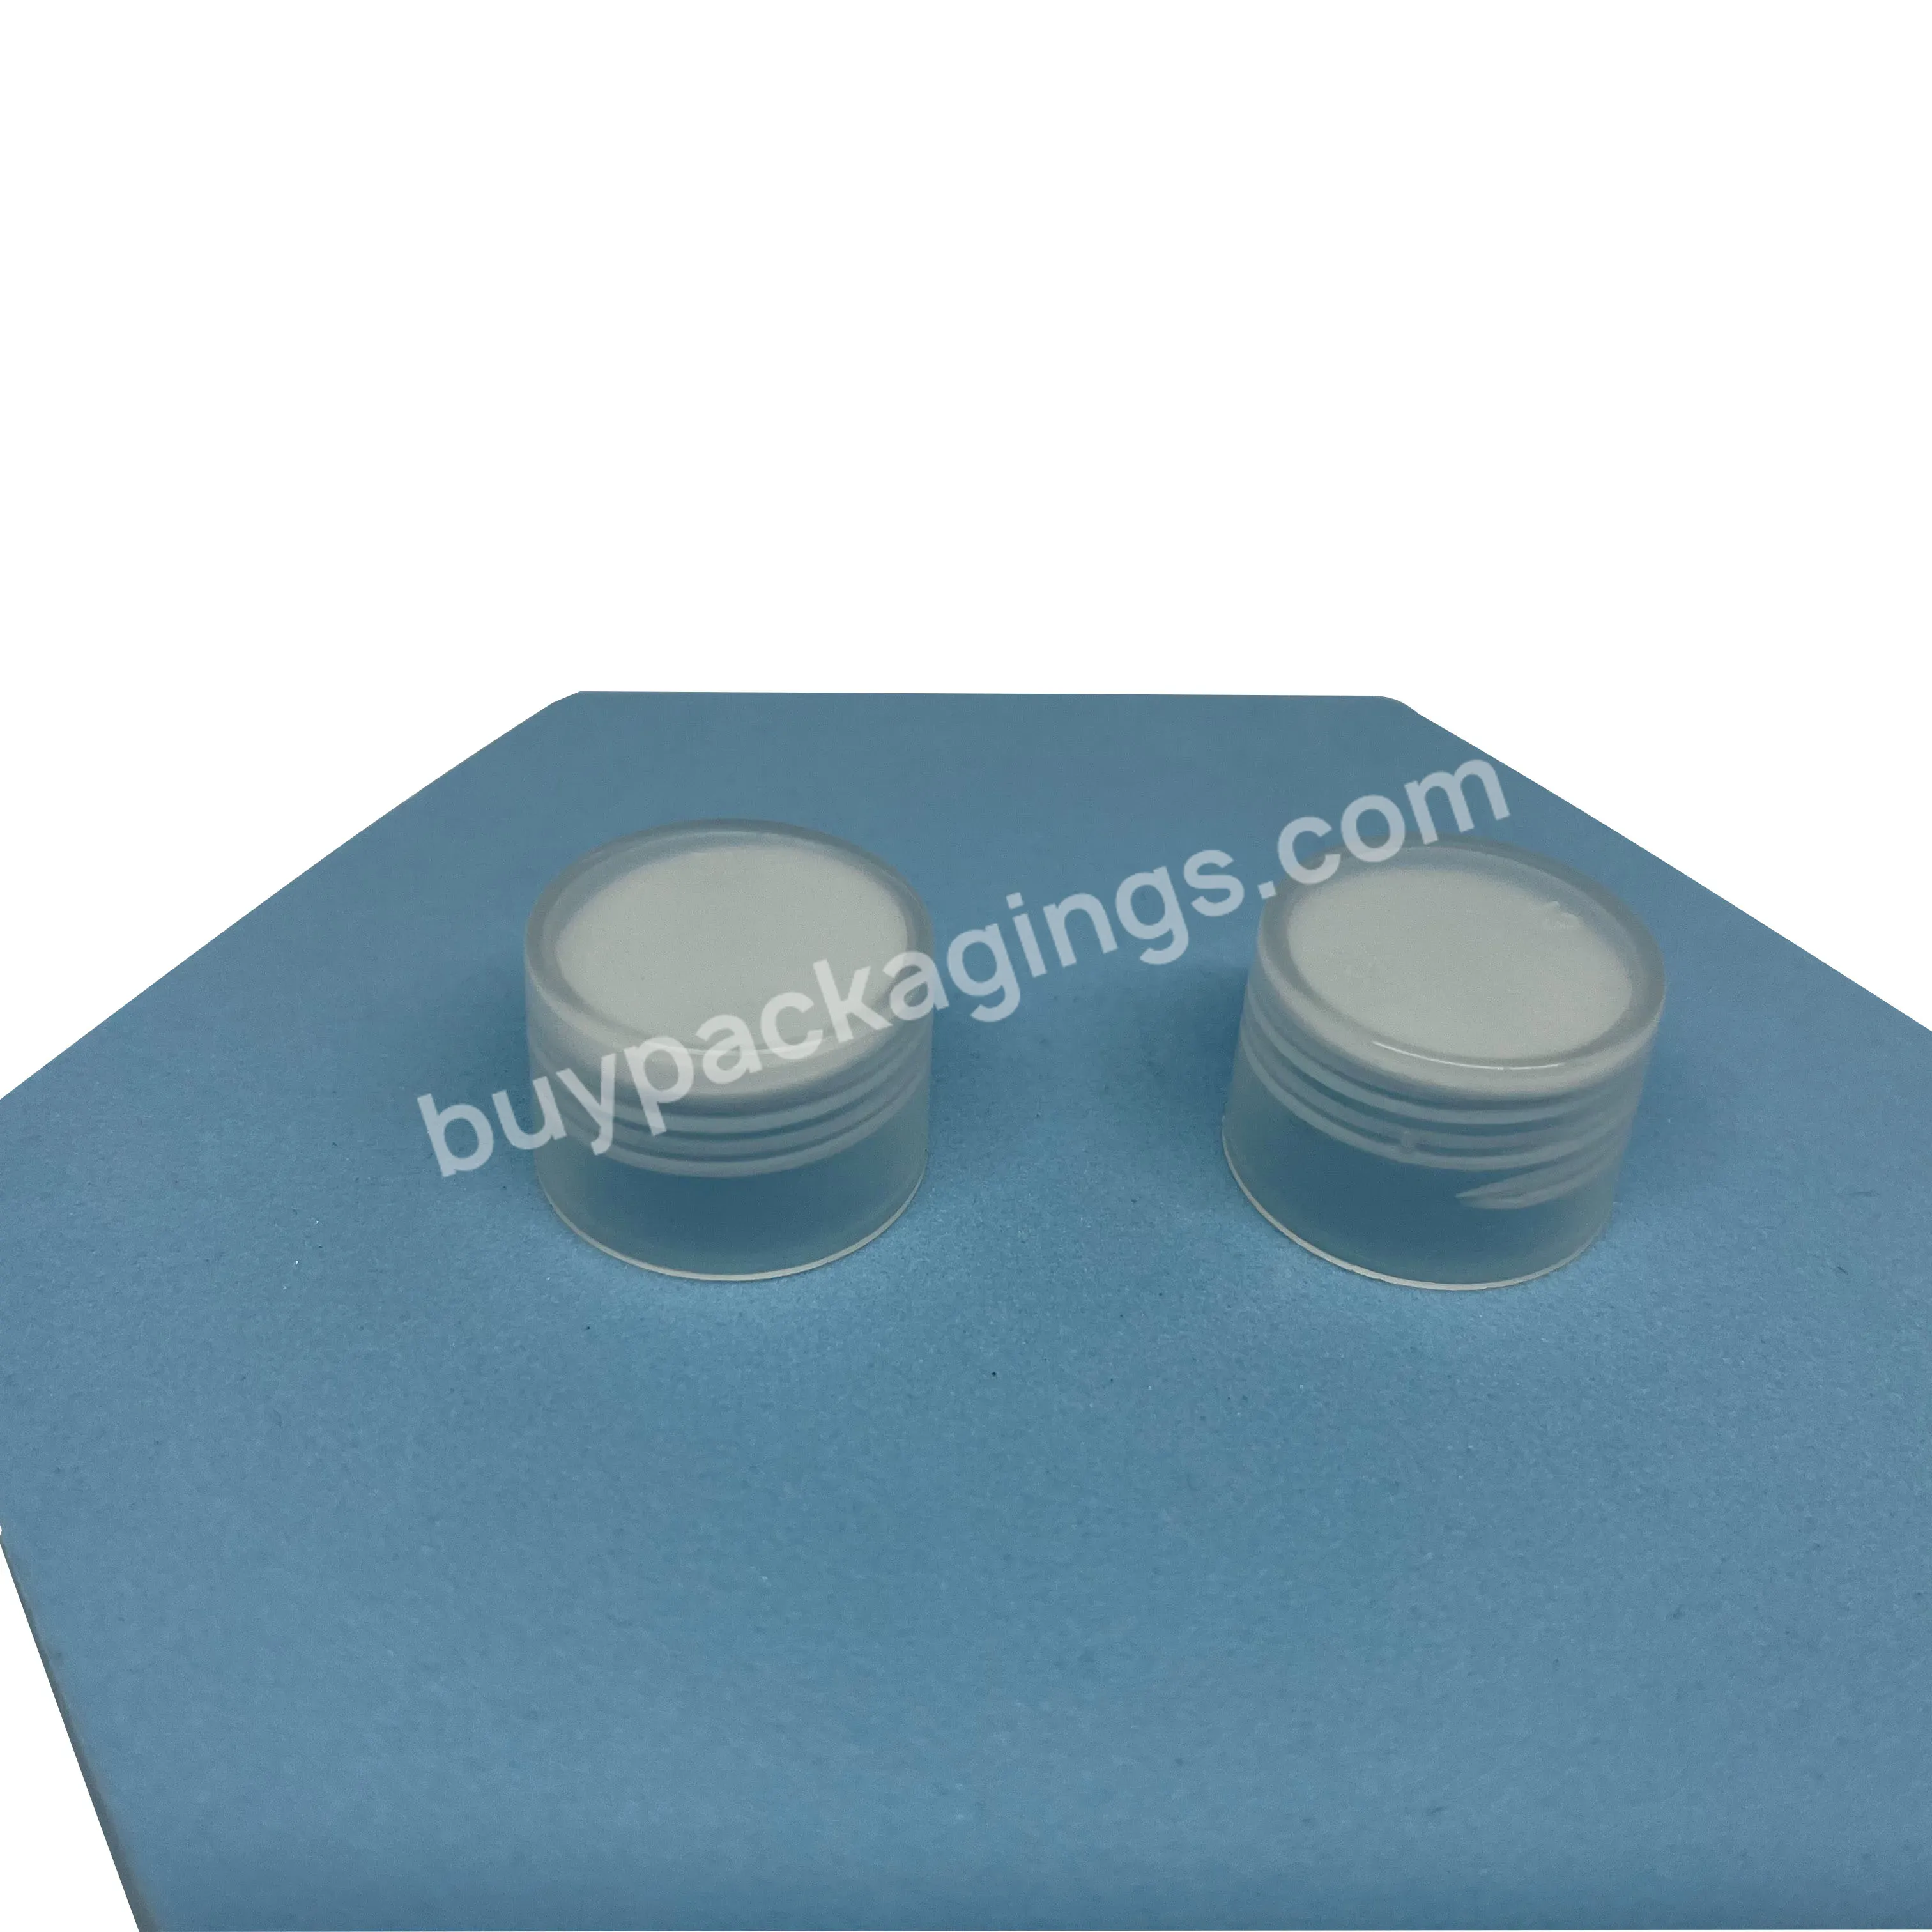 20/415 Wholesale Smooth Plastic Bottle Cap Cosmetic Bottle Cap With Leakproof Gasket Lotion Essence Cap - Buy 20/415 Wholesale Smooth Plastic Bottle Cap,Cosmetic Bottle Cap With Leakproof Gasket,Lotion Essence Cap.